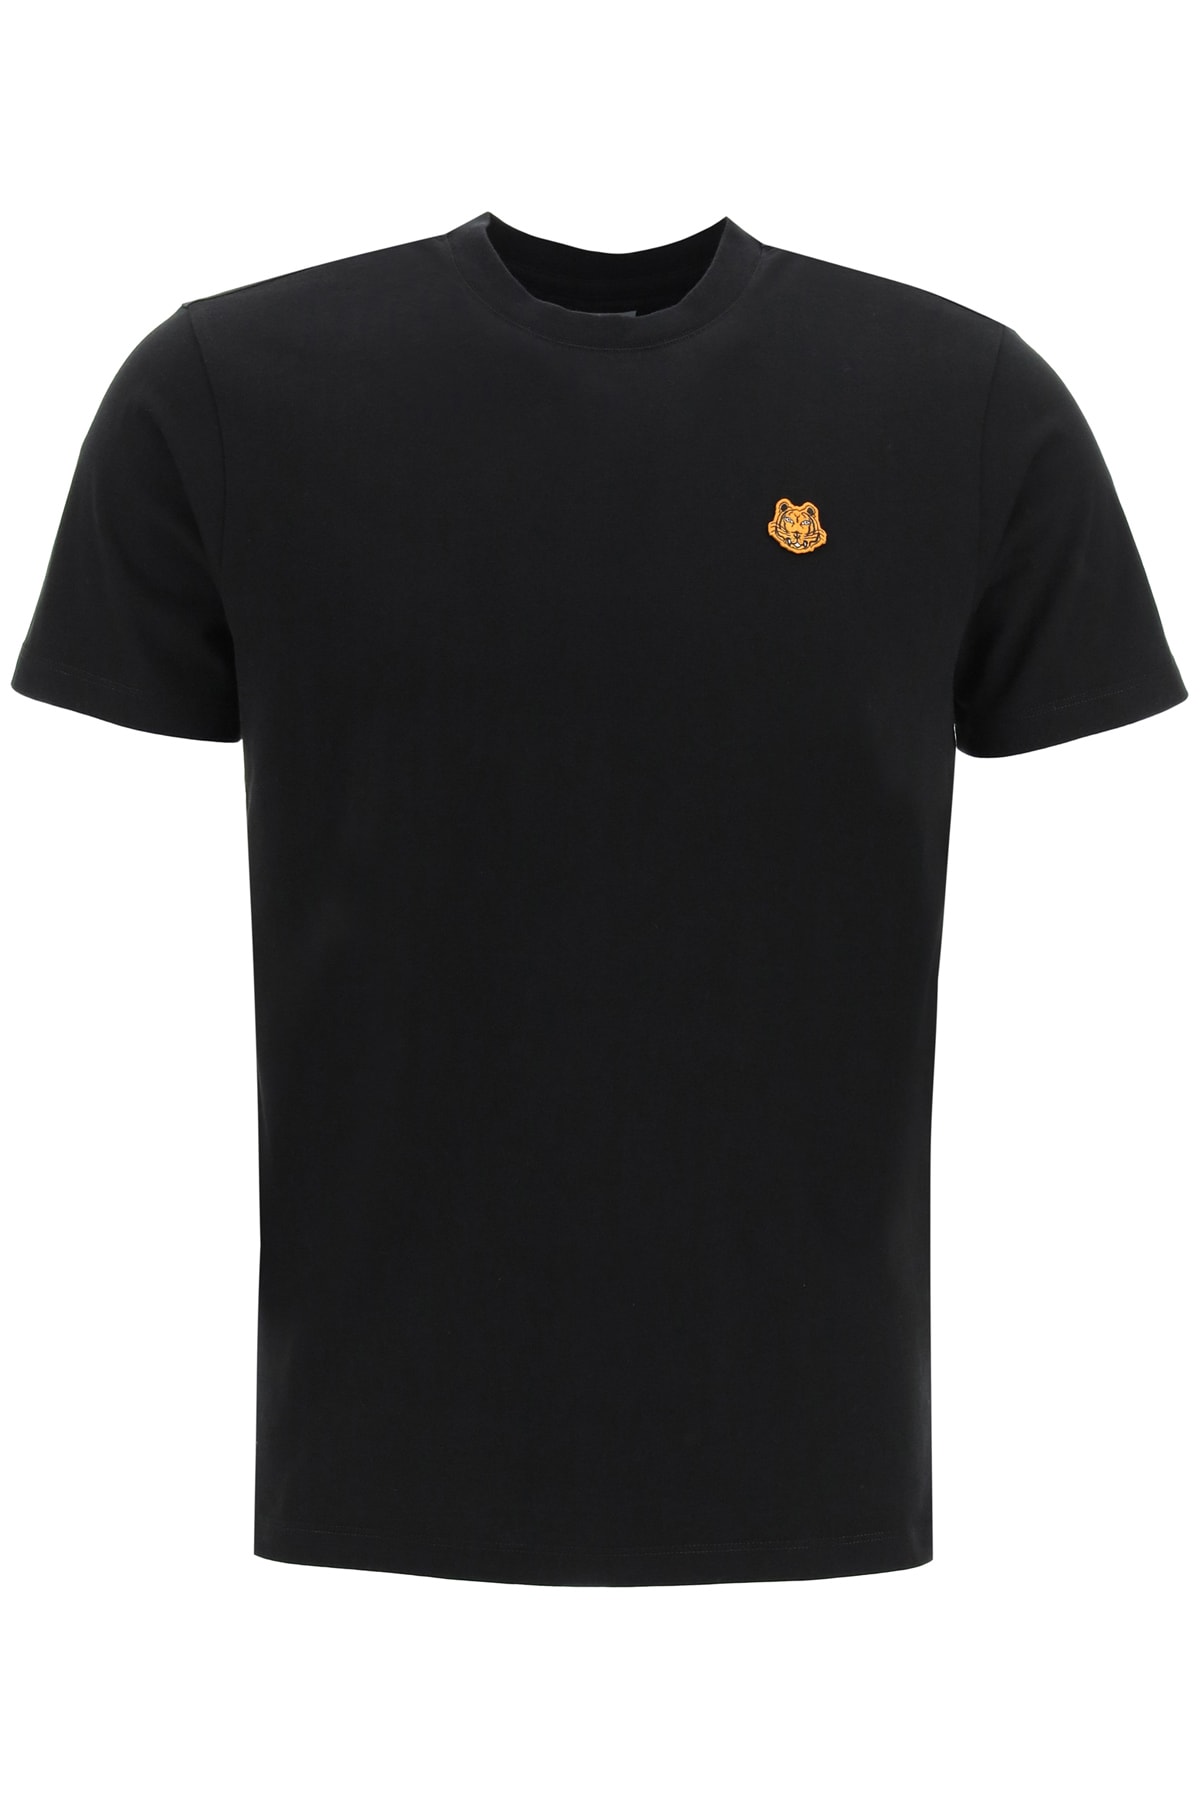 Kenzo Tiger Crest Patch T-shirt